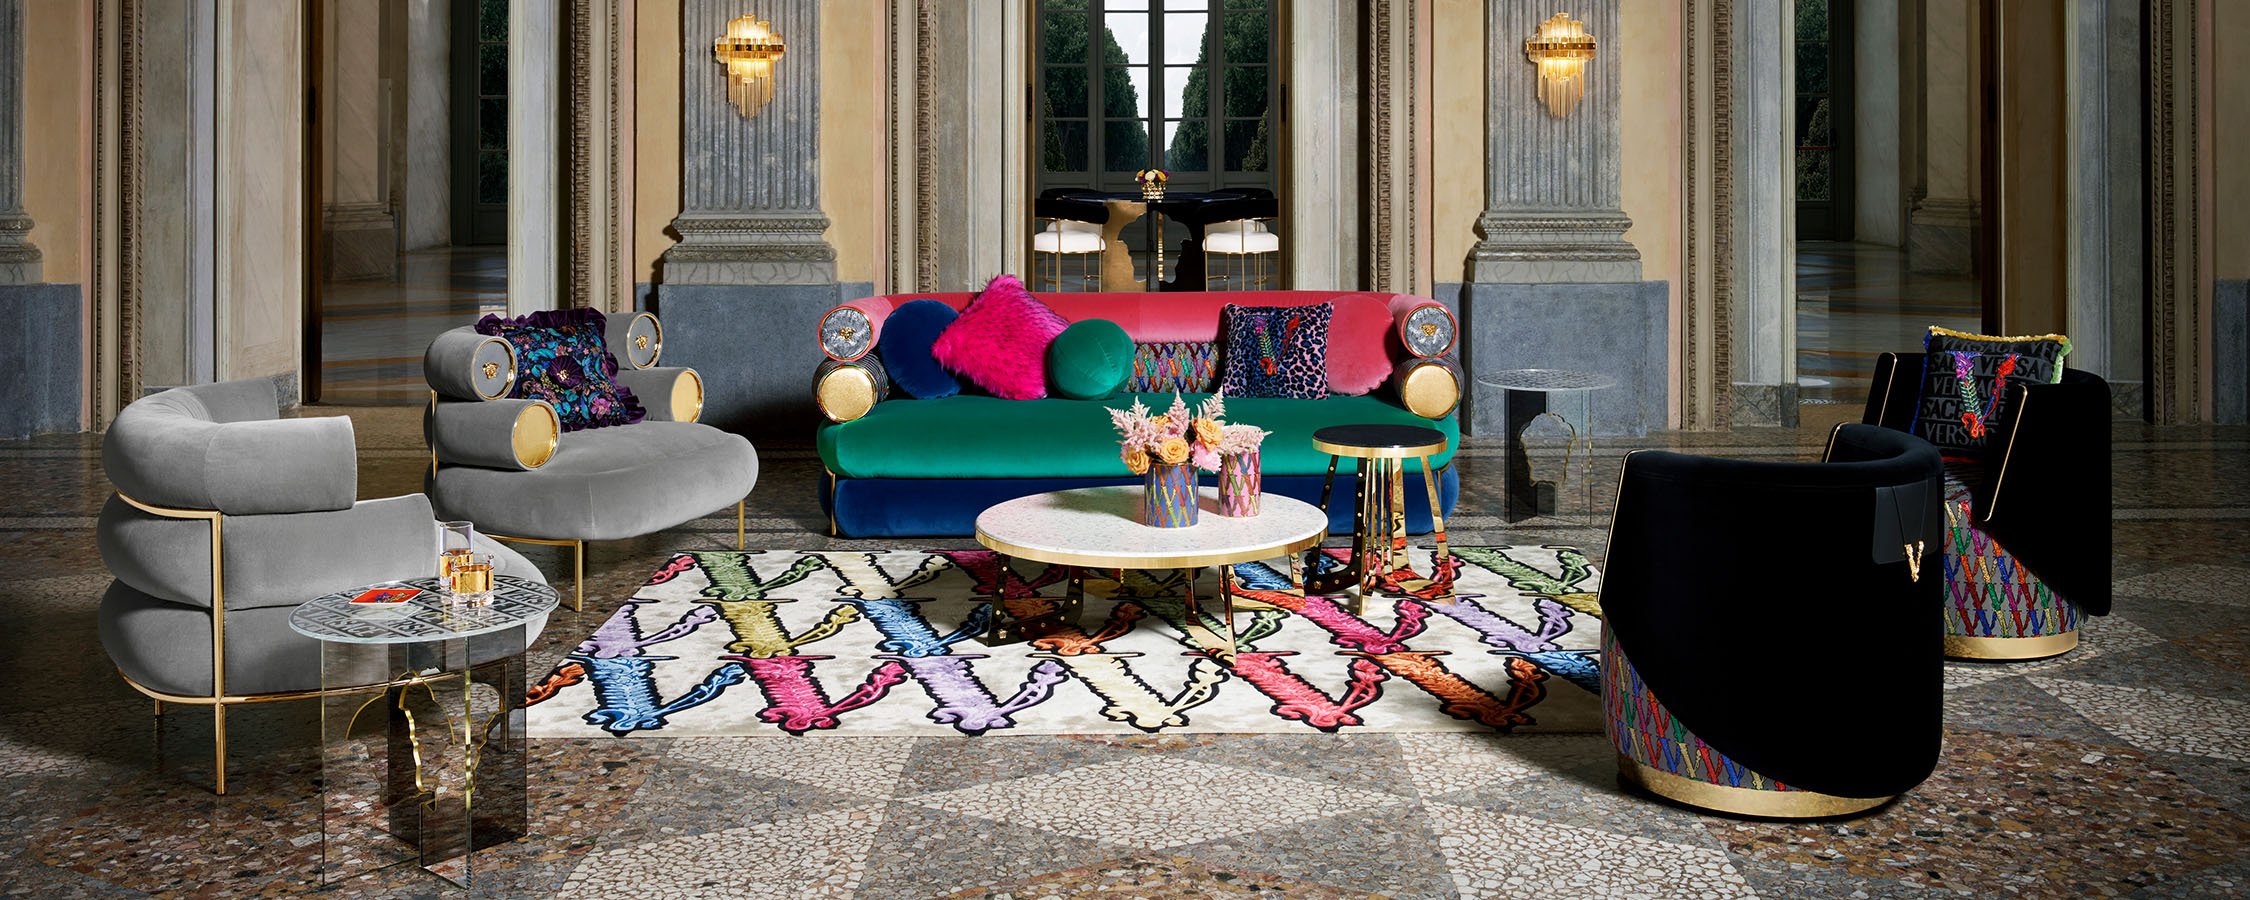 Versace Home Opens Flagship Store In Milan | Fashion News ...